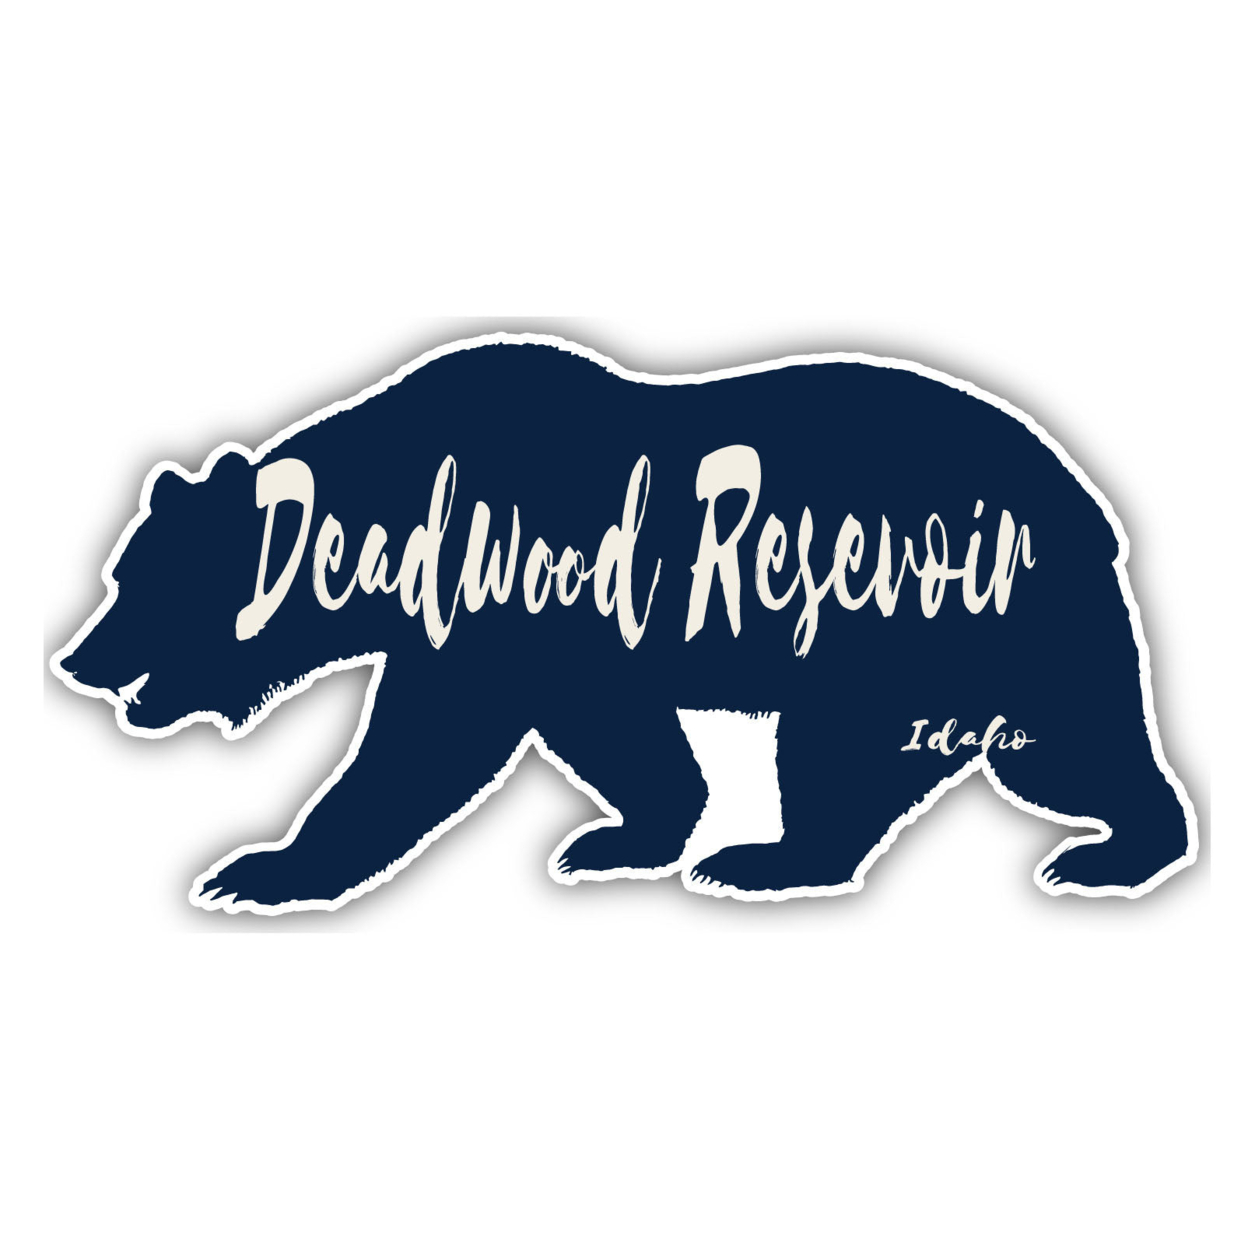 Deadwood Resevoir Idaho Souvenir Decorative Stickers (Choose Theme And Size) - 4-Pack, 4-Inch, Bear